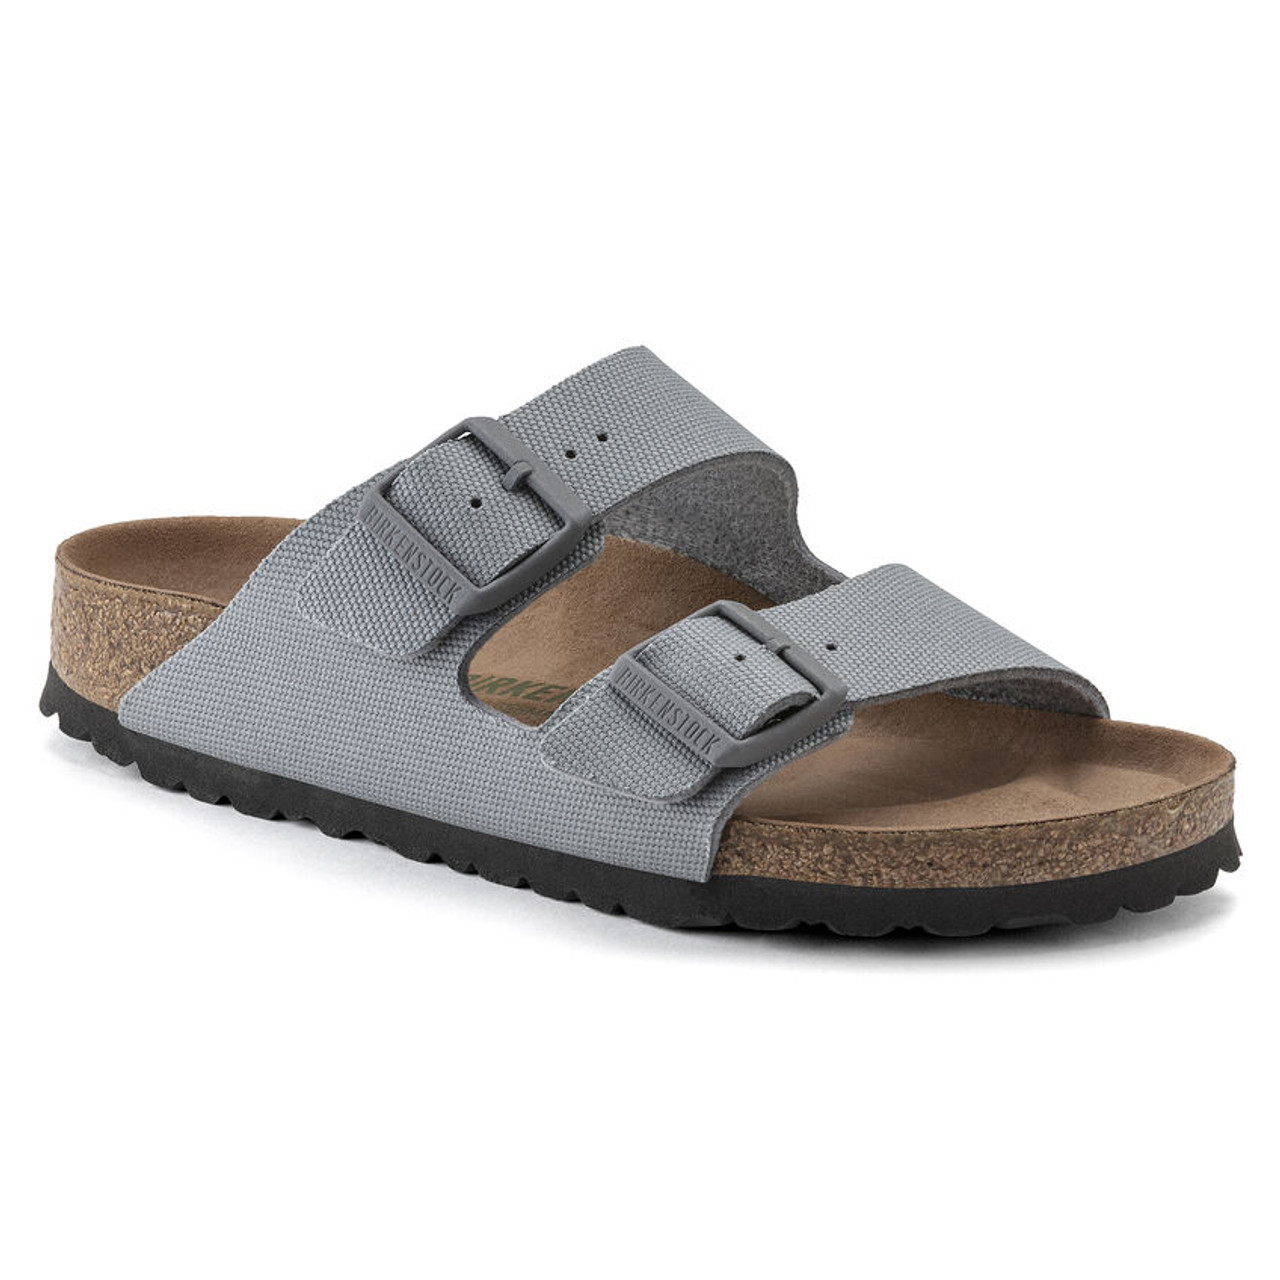 BIRKENSTOCK ARIZONA CANVAS SANDAL STONE COIN - Pee Outfitters